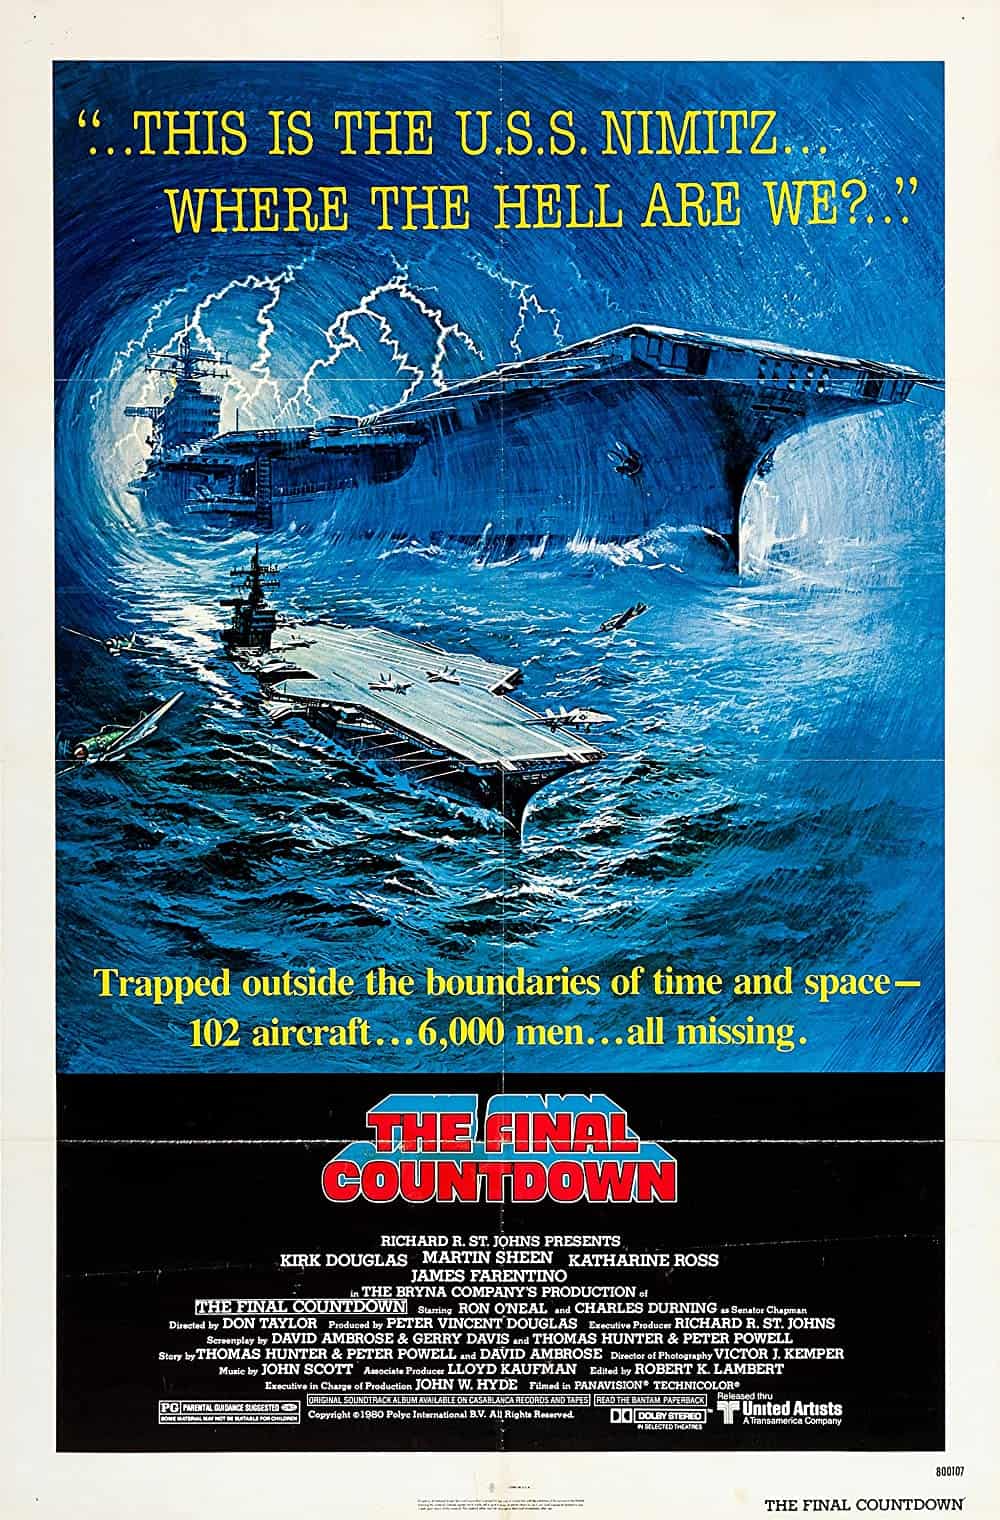 The Final Countdown (May 21, 1980) 13 Best Pearl Harbor Movies You Can't Miss